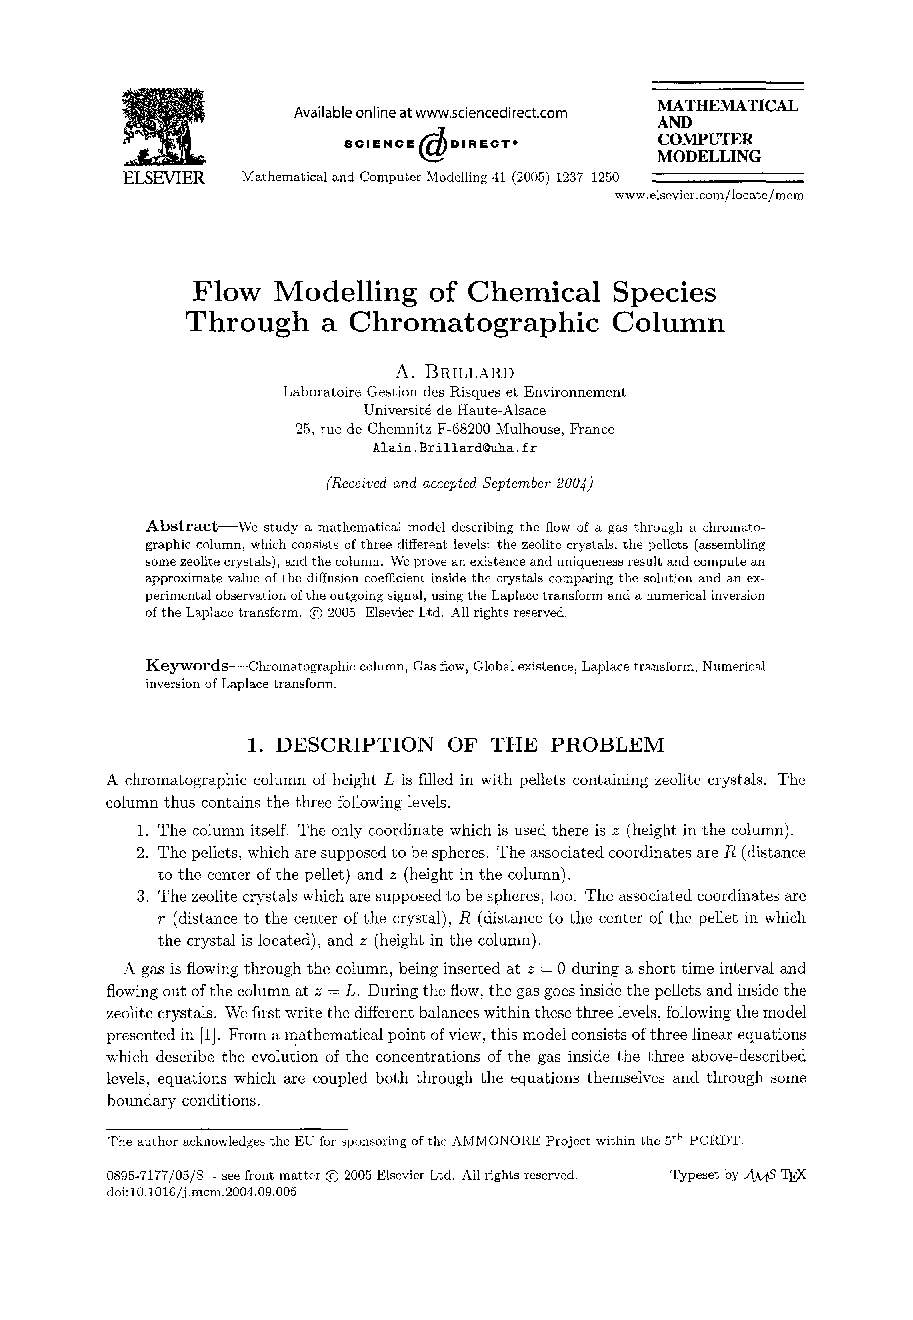 Flow modelling of chemical species through a chromatographic column